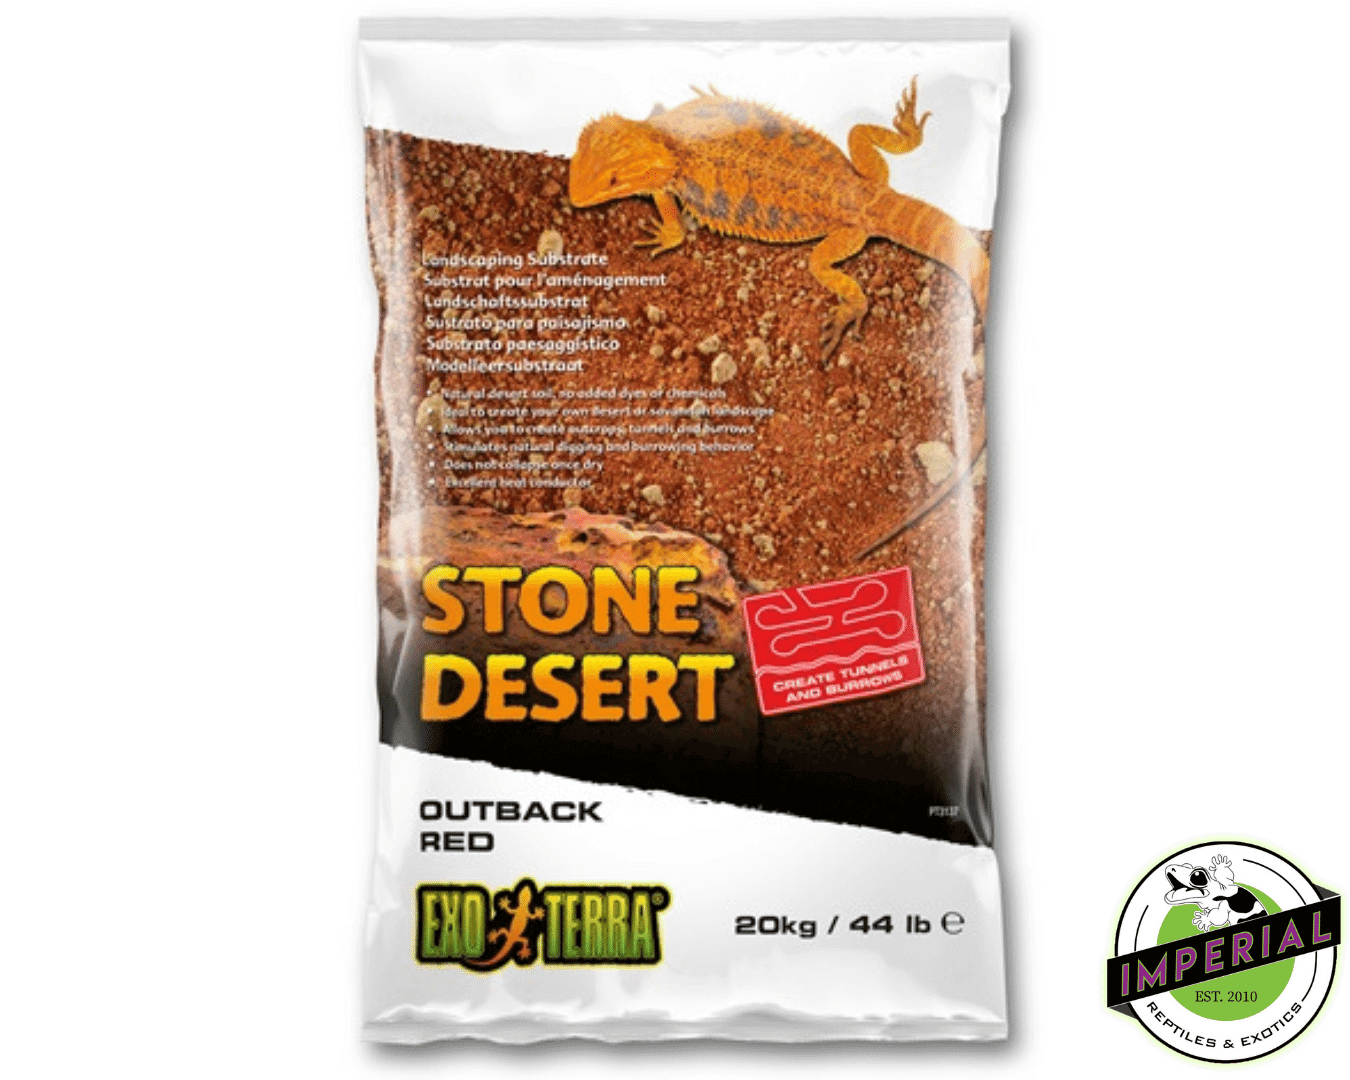 buy reptile substrate for sale online, buy reptile supplies near me